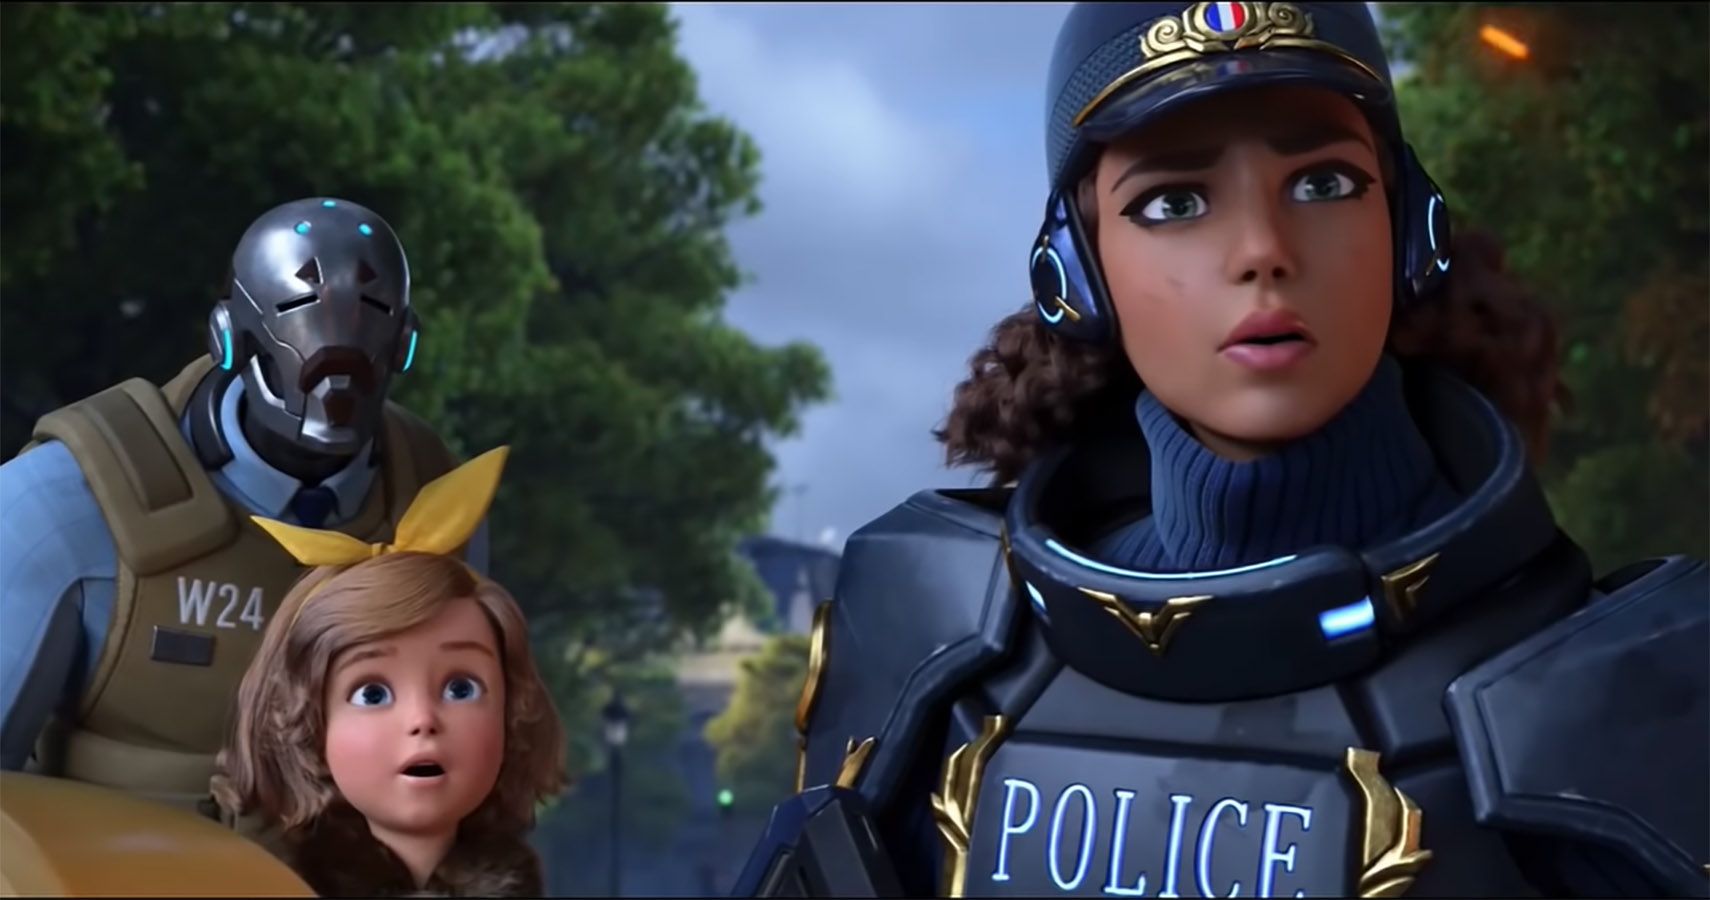 An image from the Overwatch 2 trailer